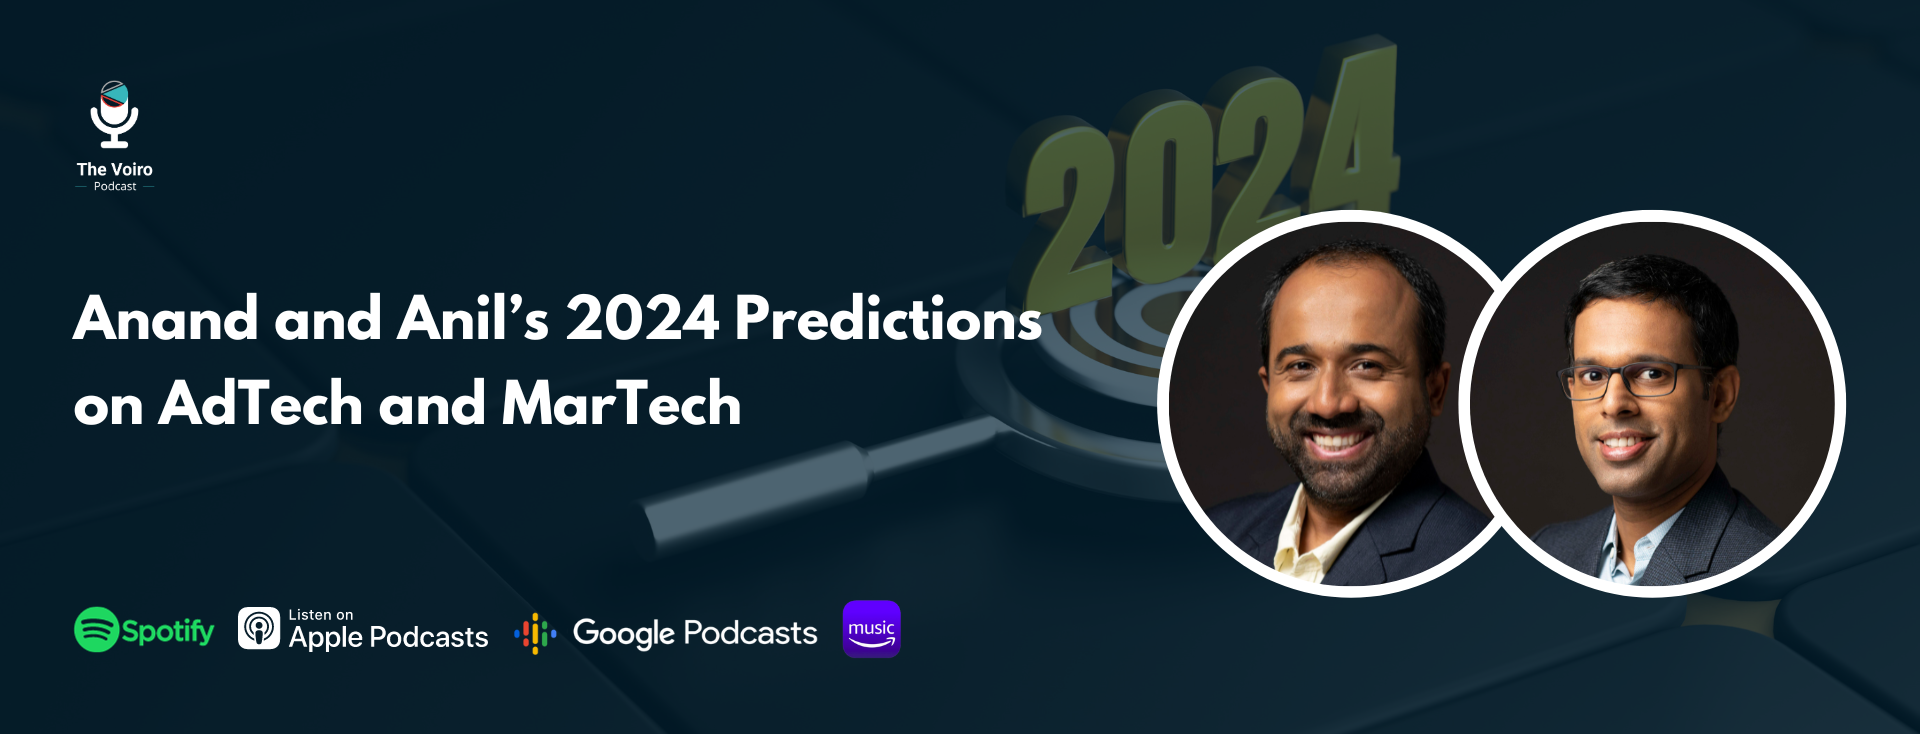 Anand and Anil’s 2024 Predictions on AdTech and MarTech